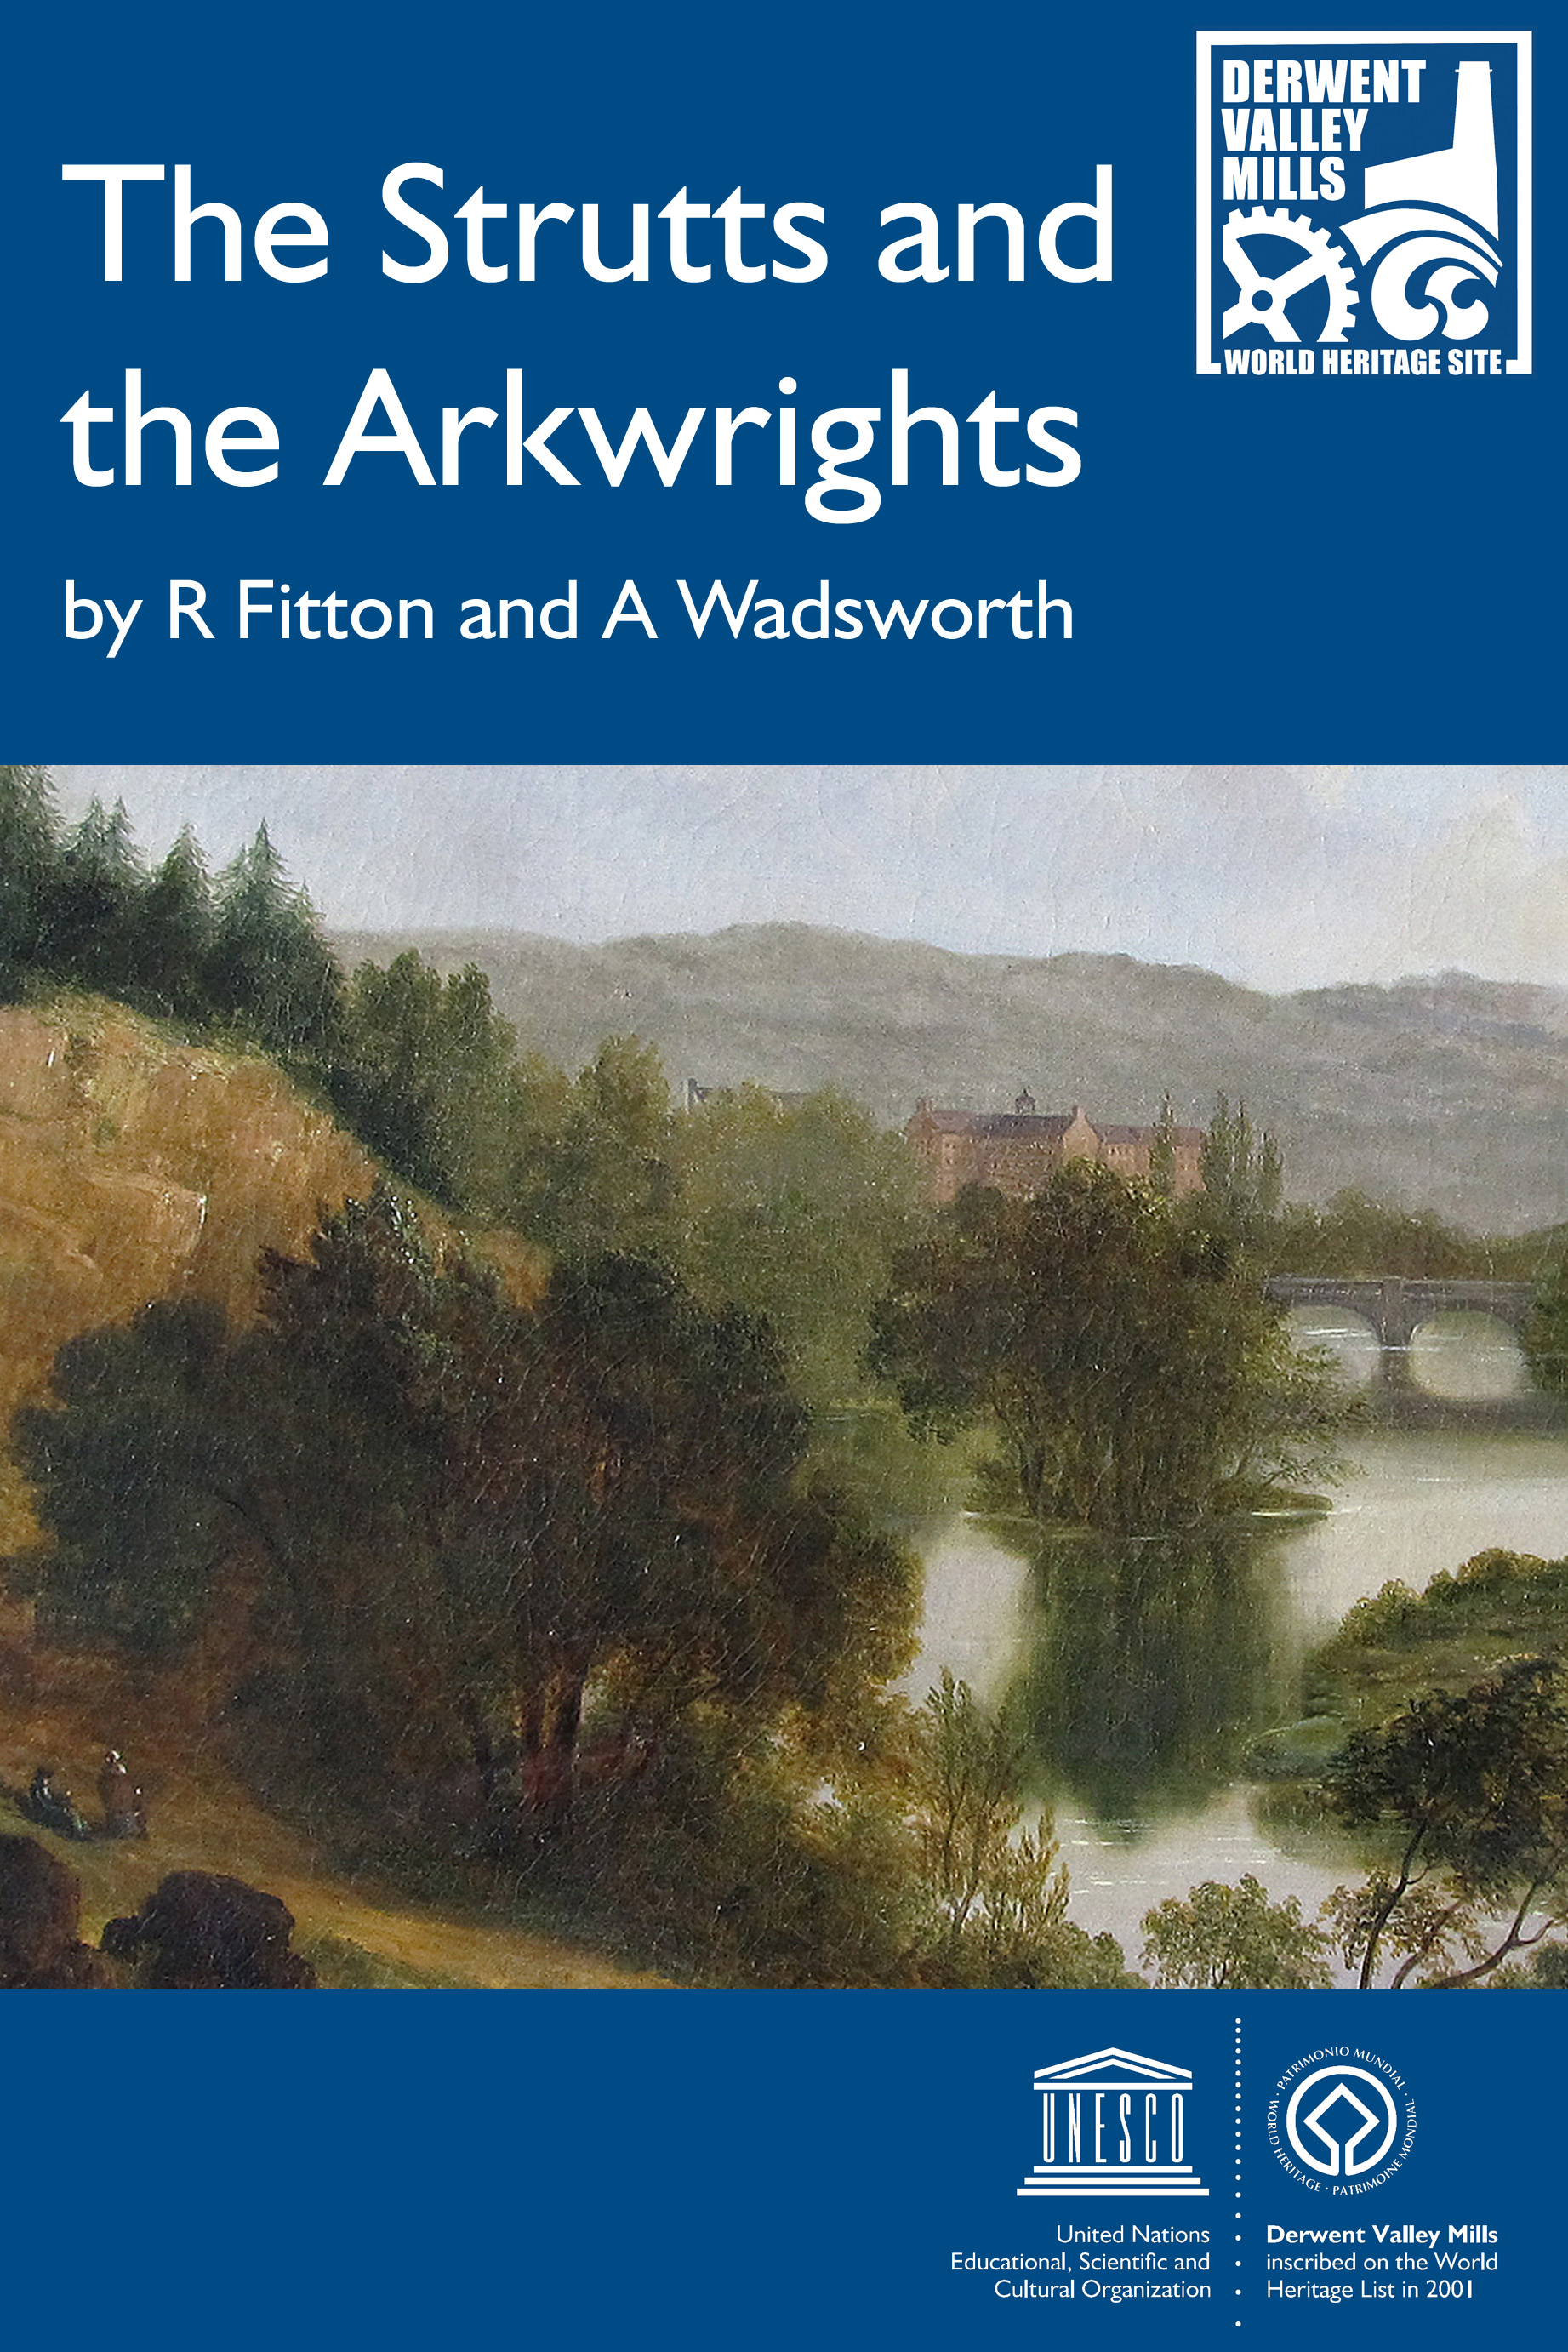 Front cover of The Strutts and the Arkwrights